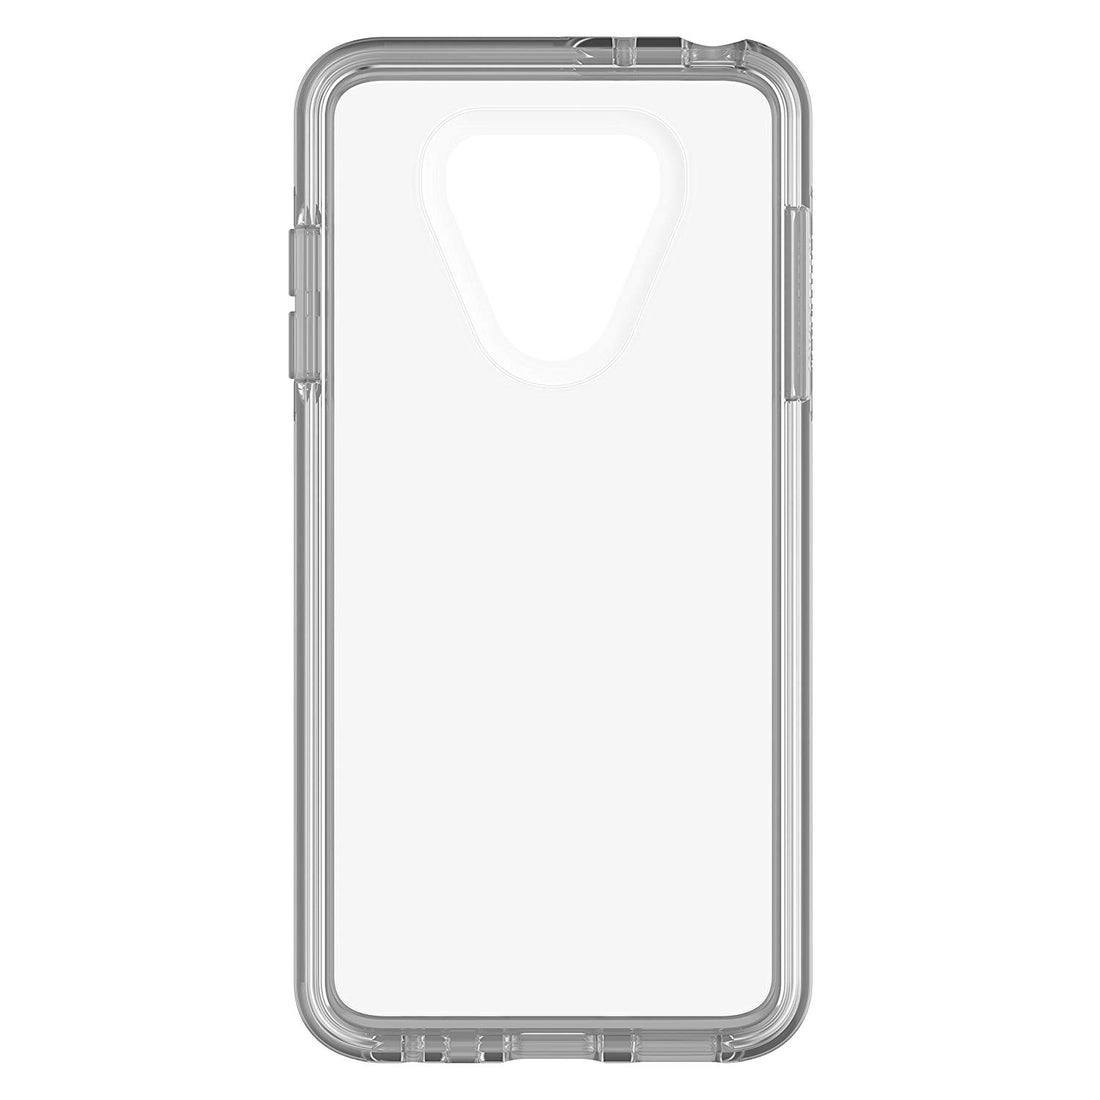 OtterBox SYMMETRY SERIES Case for LG G6 - Clear (Certified Refurbished)